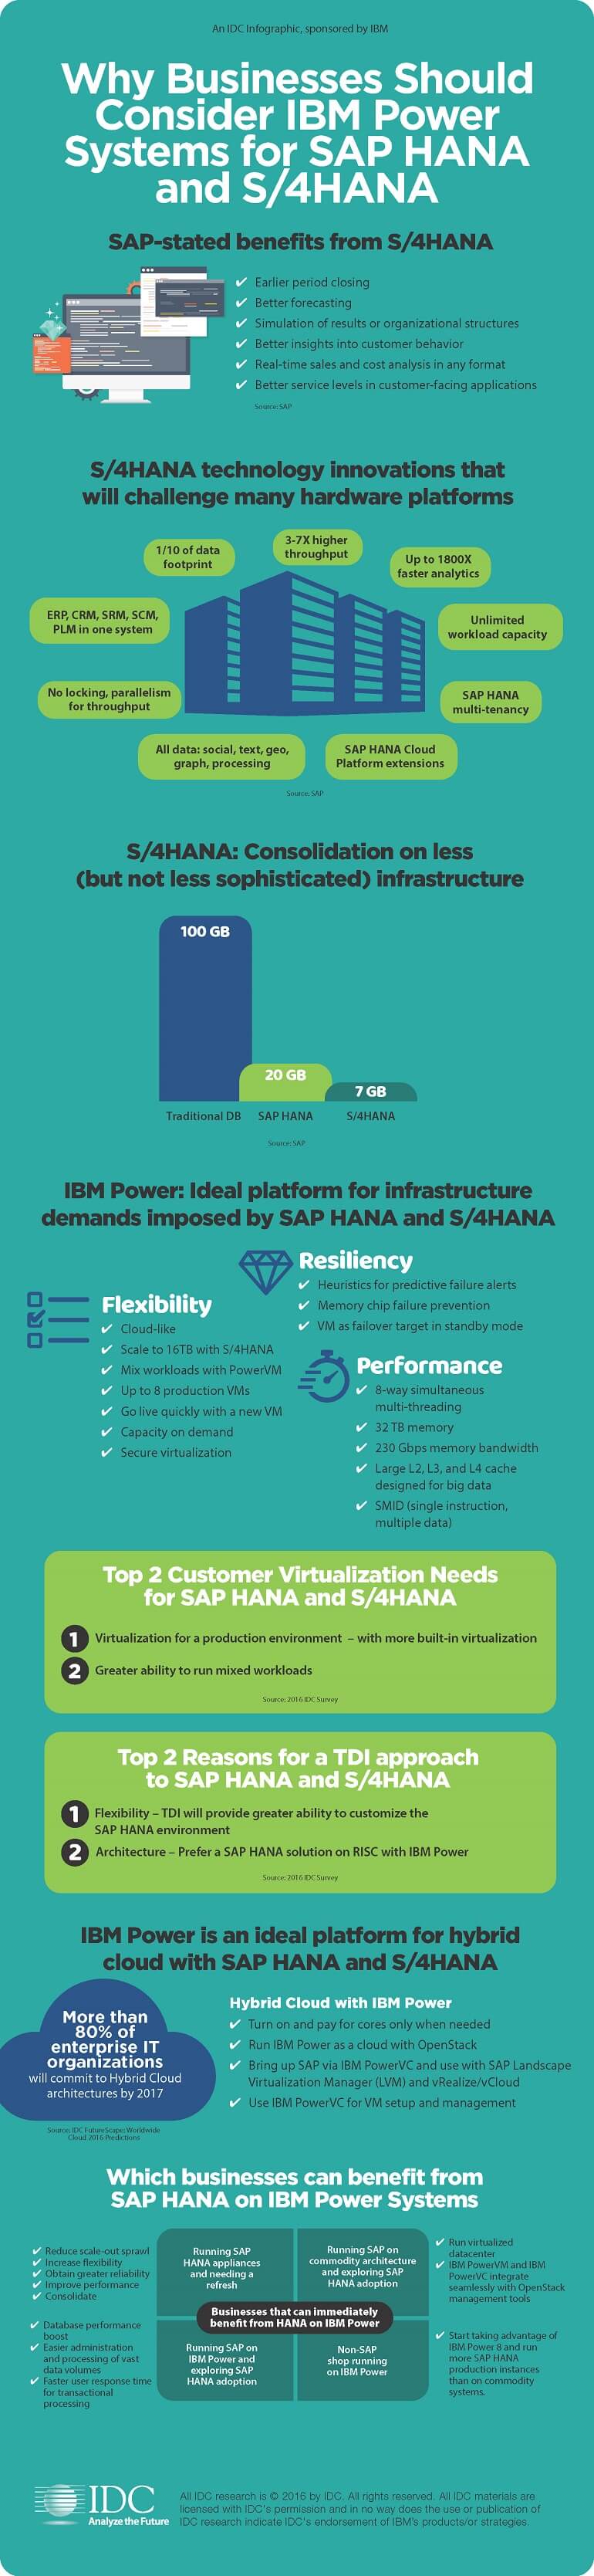 Infographic displaying IBM Power Systems